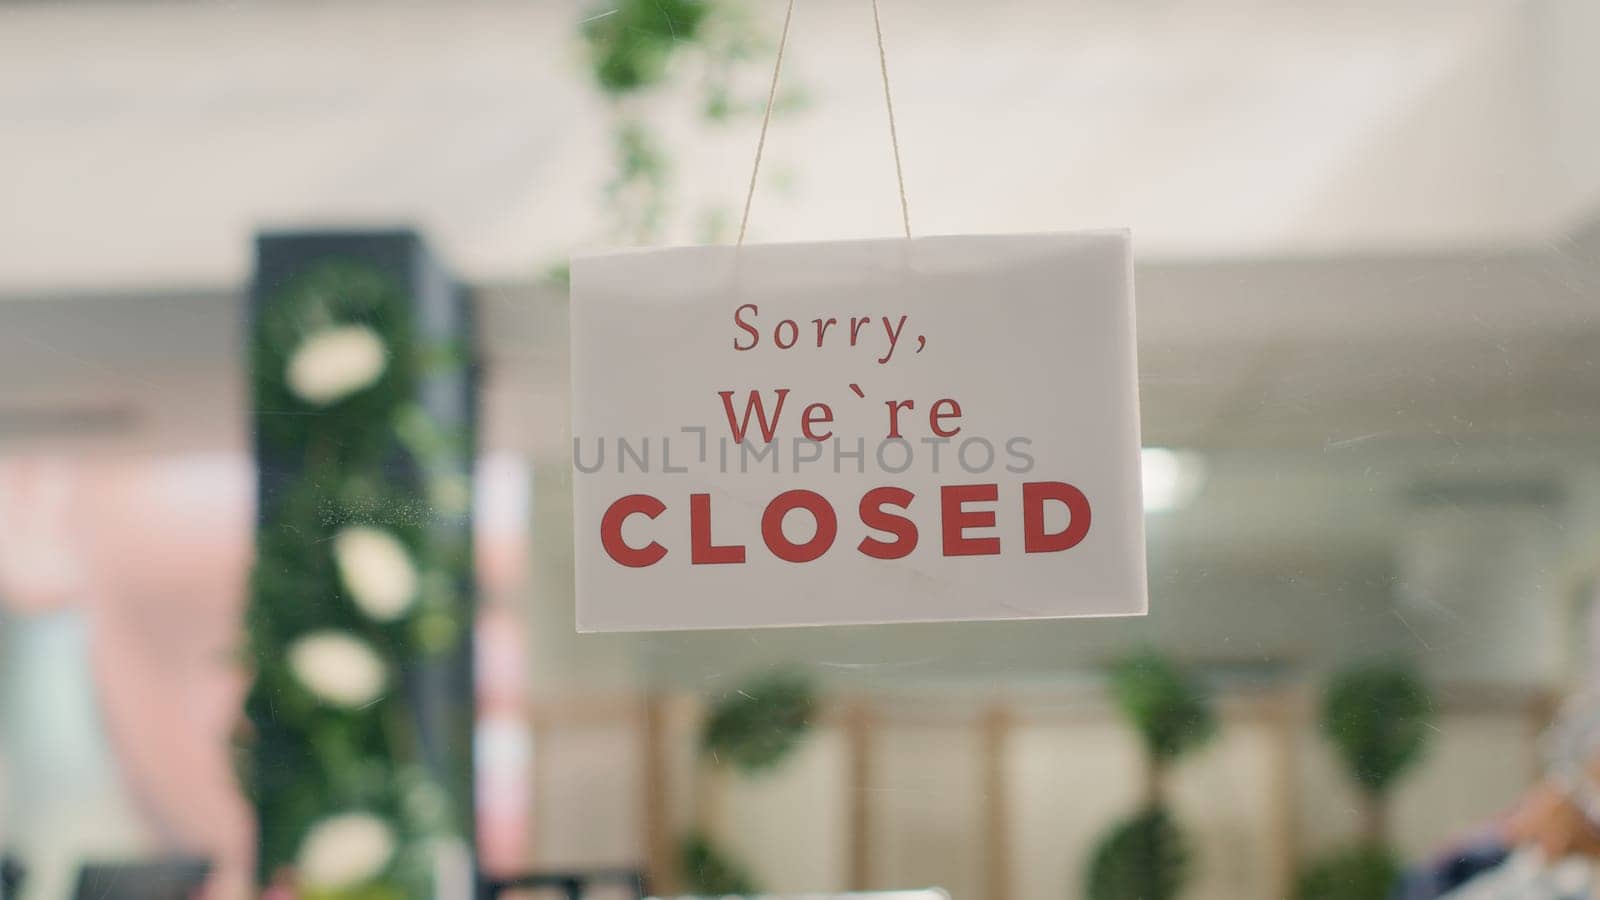 Sorry we are closed sign in empty fancy fashion boutique with stylish formal clothes. Message on designer clothing men premium showroom door announcing customers that shop is closed